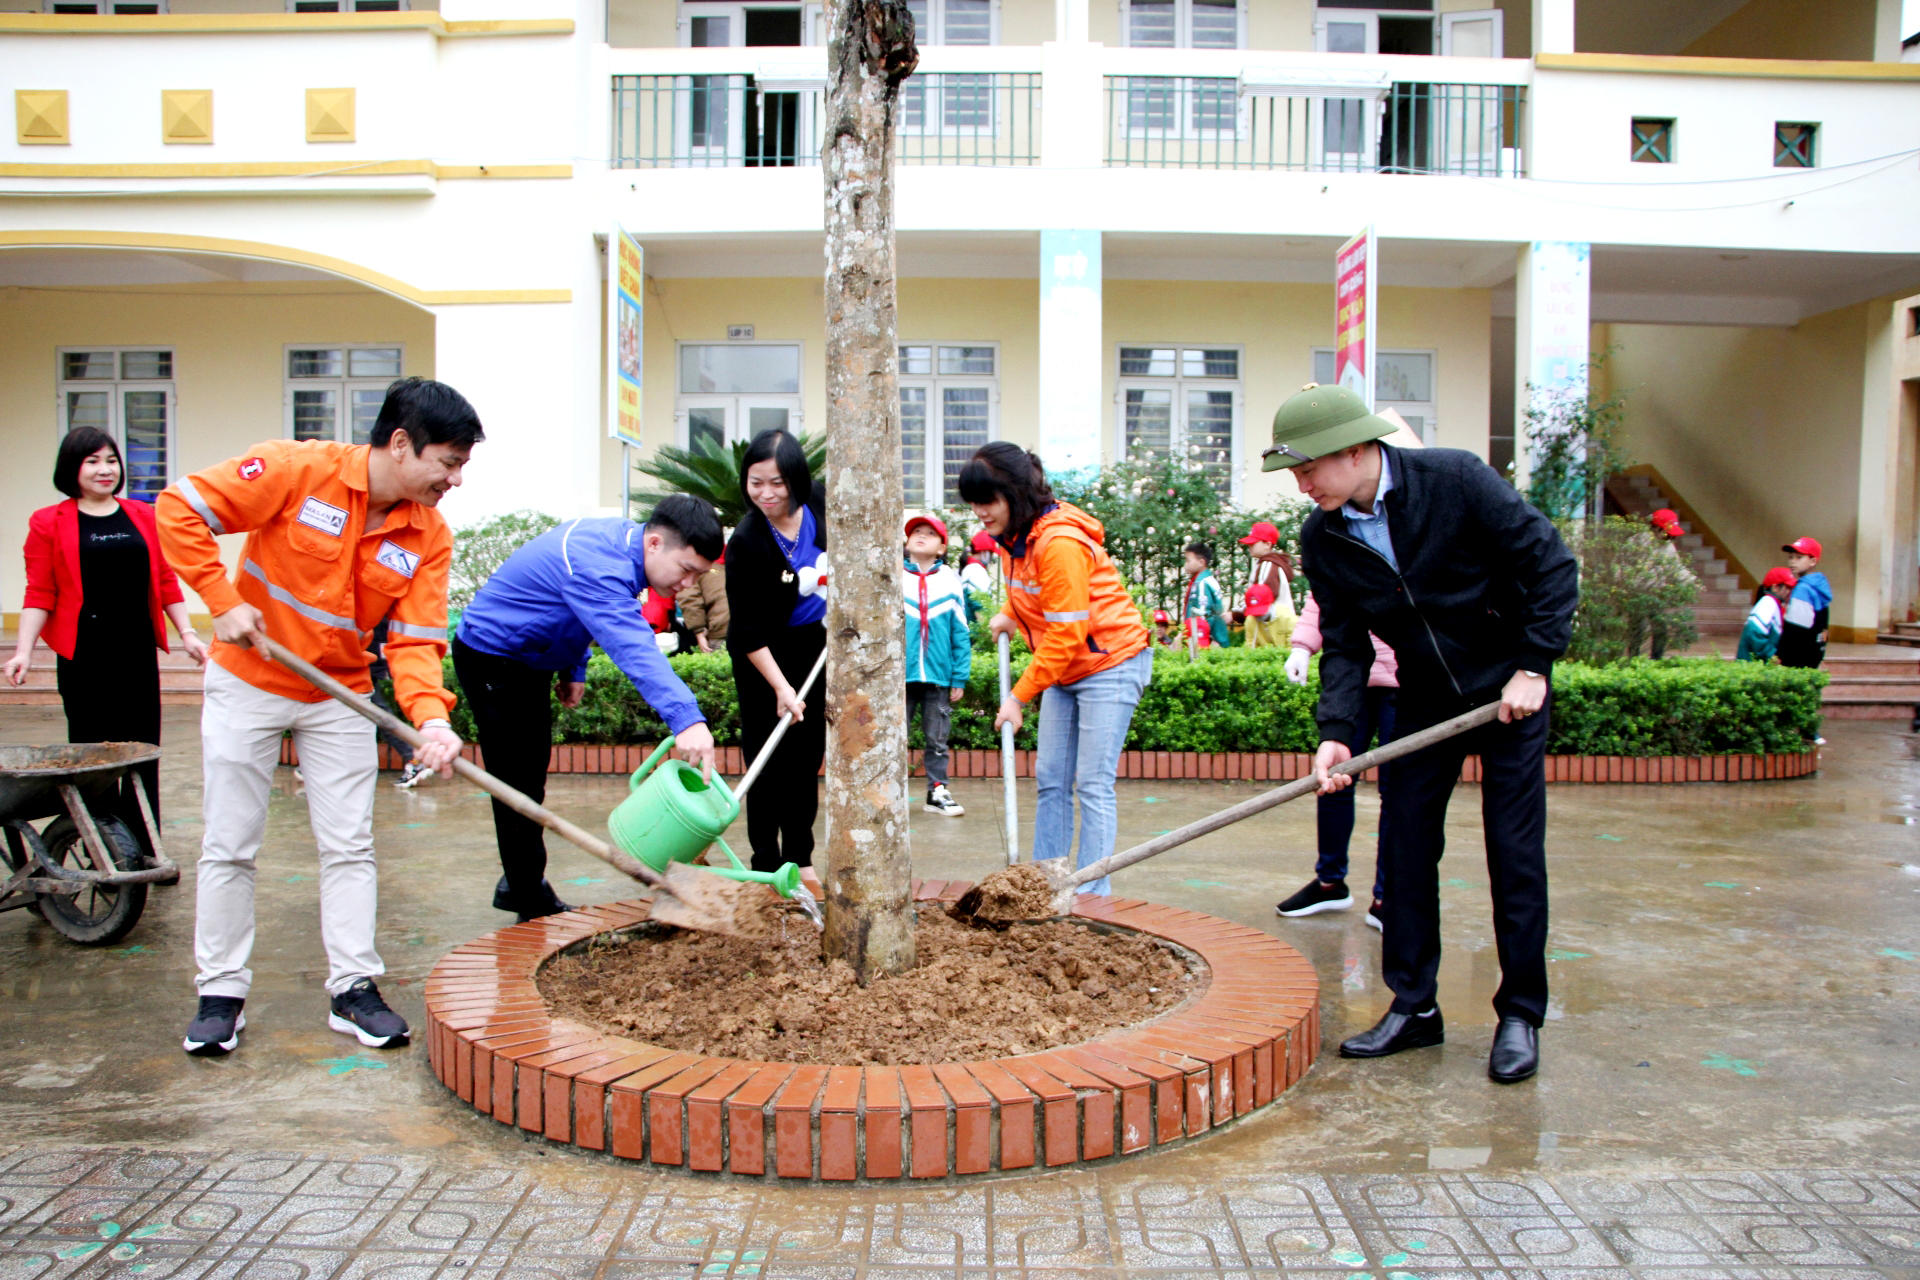 Nui Phao Company donated 03 trees planted at the school campus.